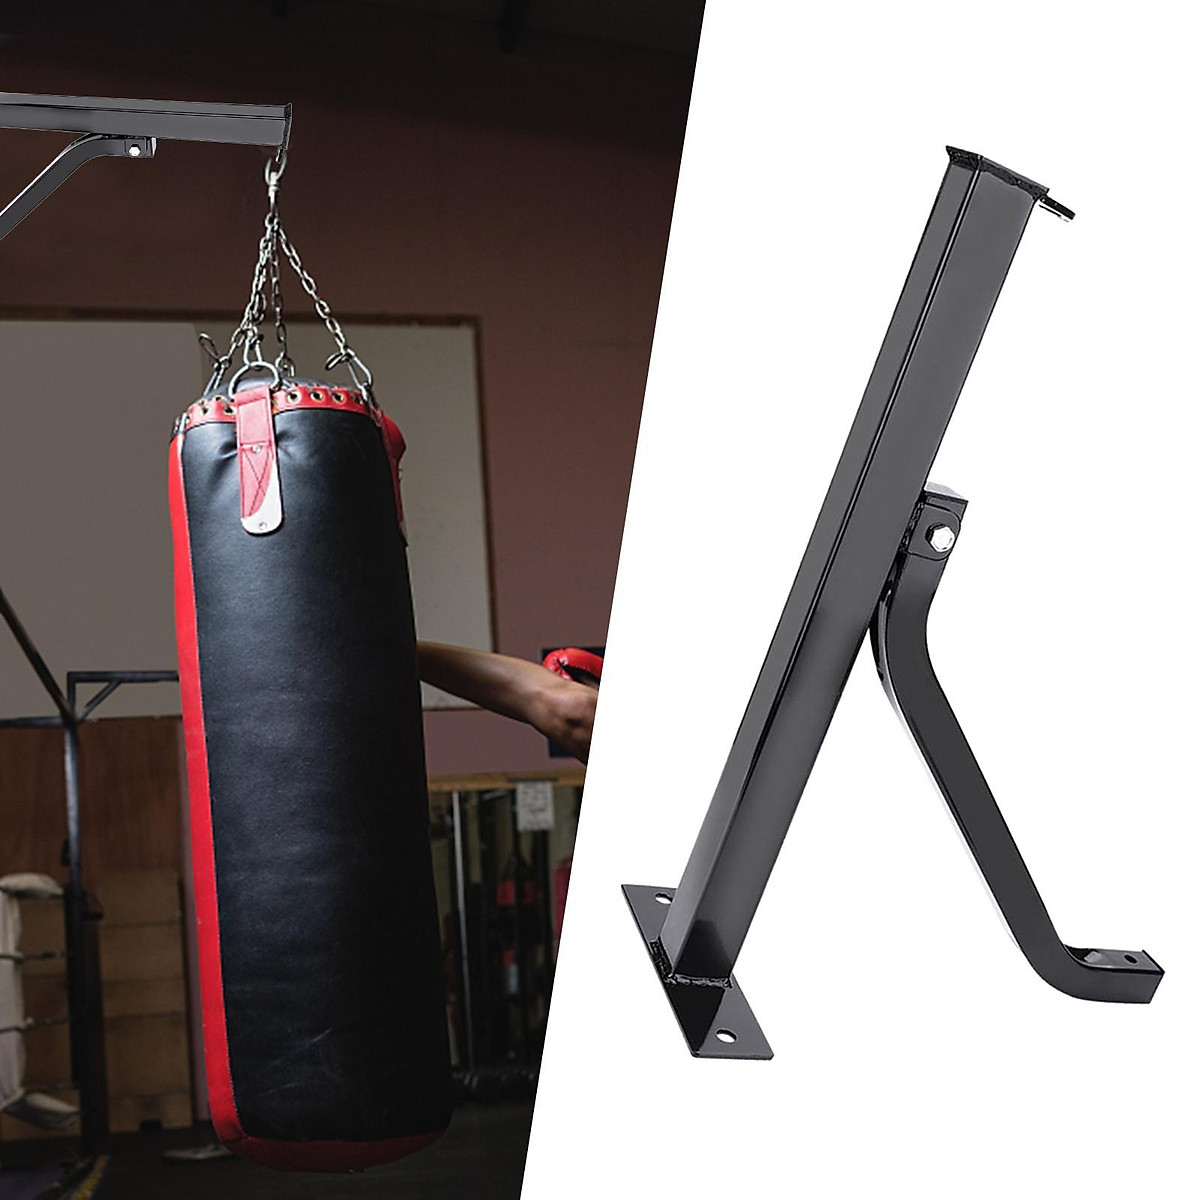 Boxing & MMA Sale: Deals on Boxing Gloves, Punching Bags & Training Supplies